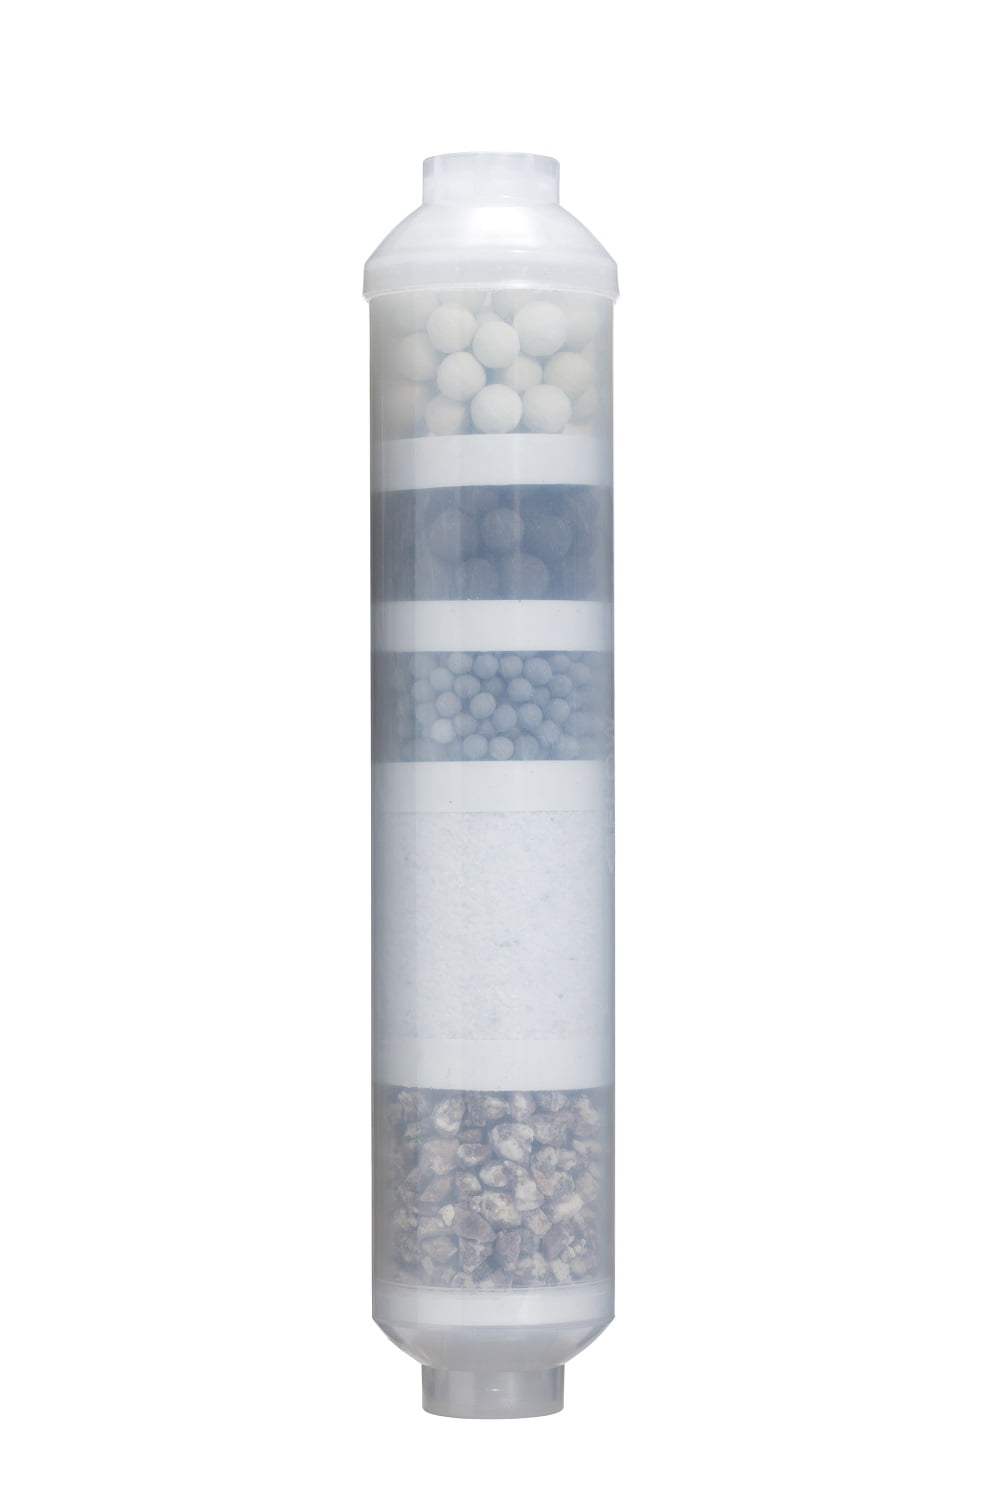 Alkaline Water Filter Cartridge 10" Inline Quick Connect with Mineral Ball PH 